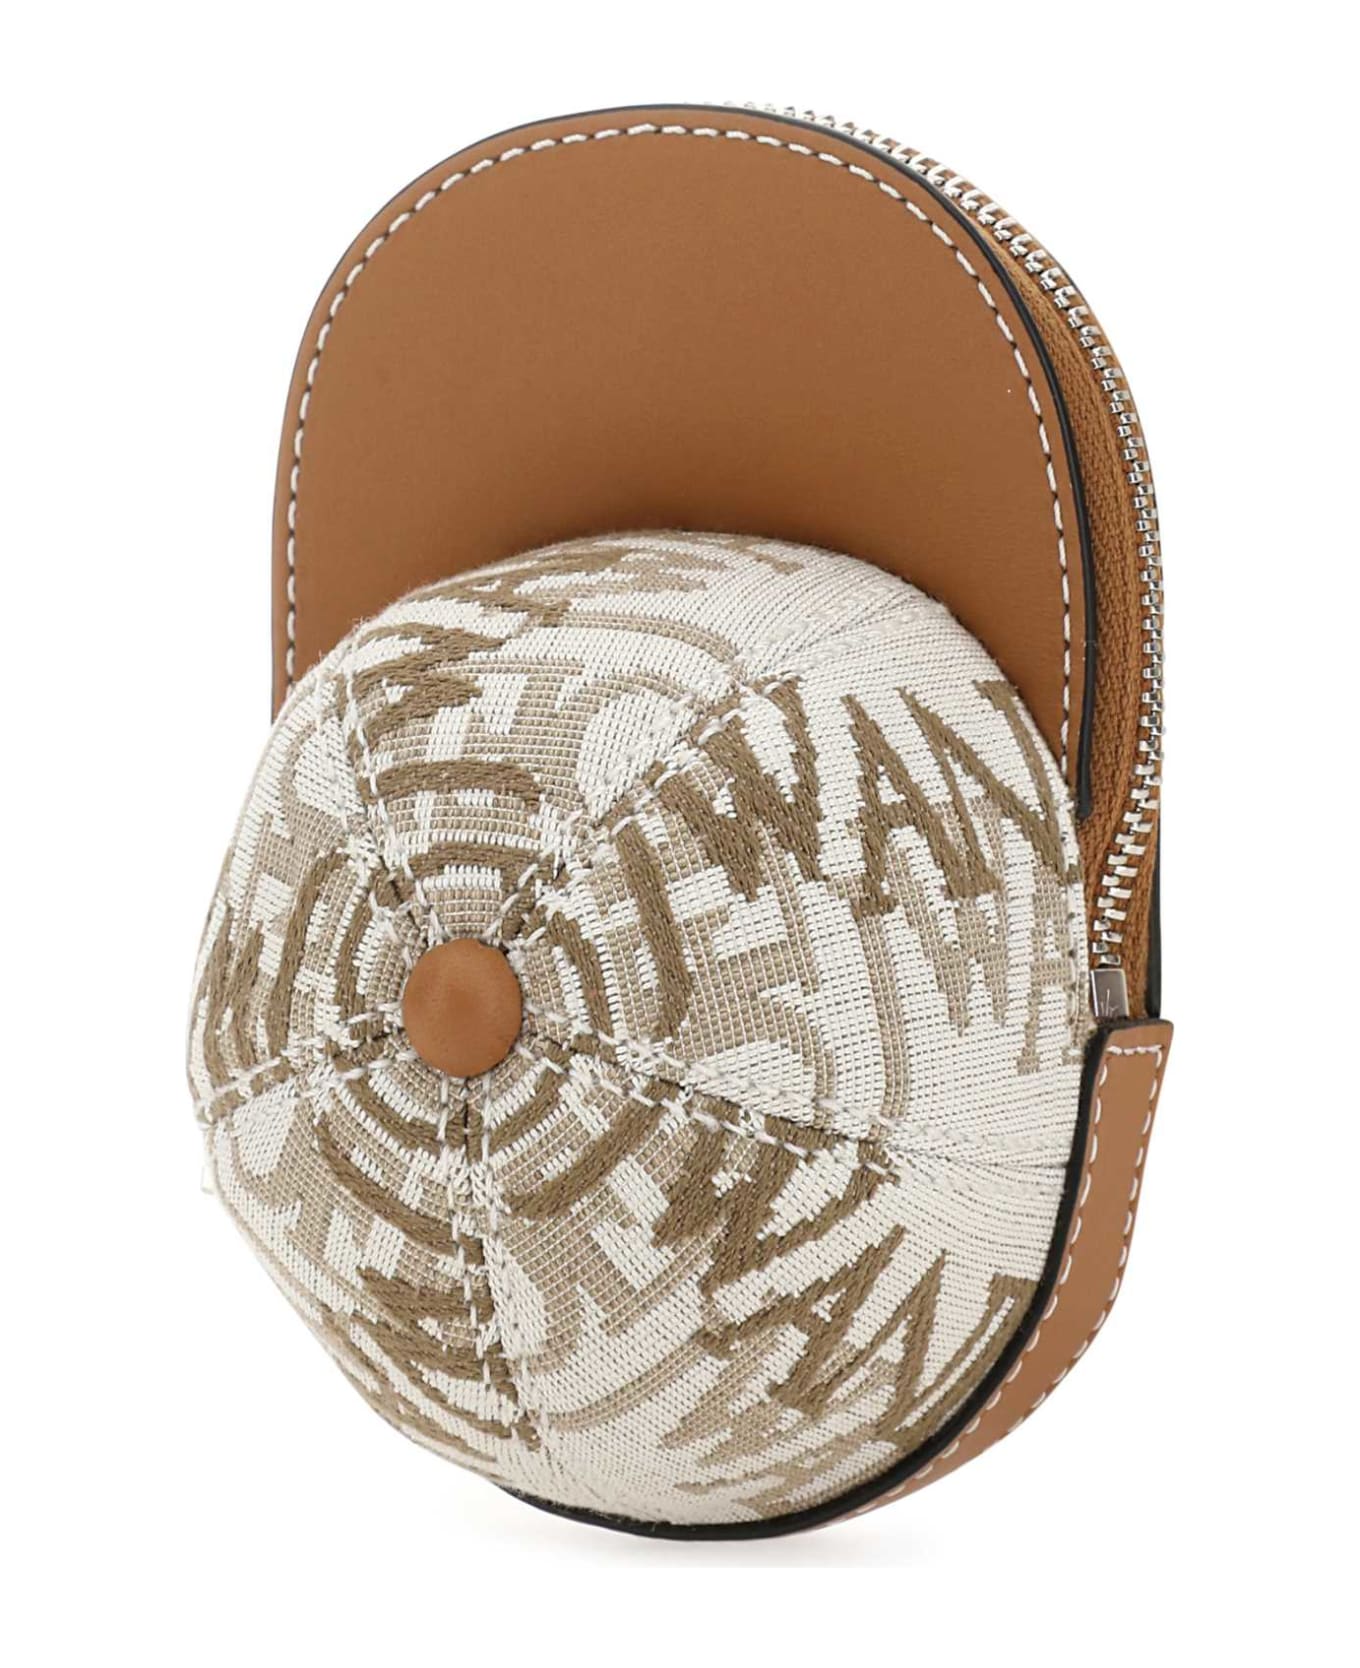 J.W. Anderson Two-tone Canvas And Leather Nano Cap Crossbody Bag - NATURALPECAN ショルダーバッグ